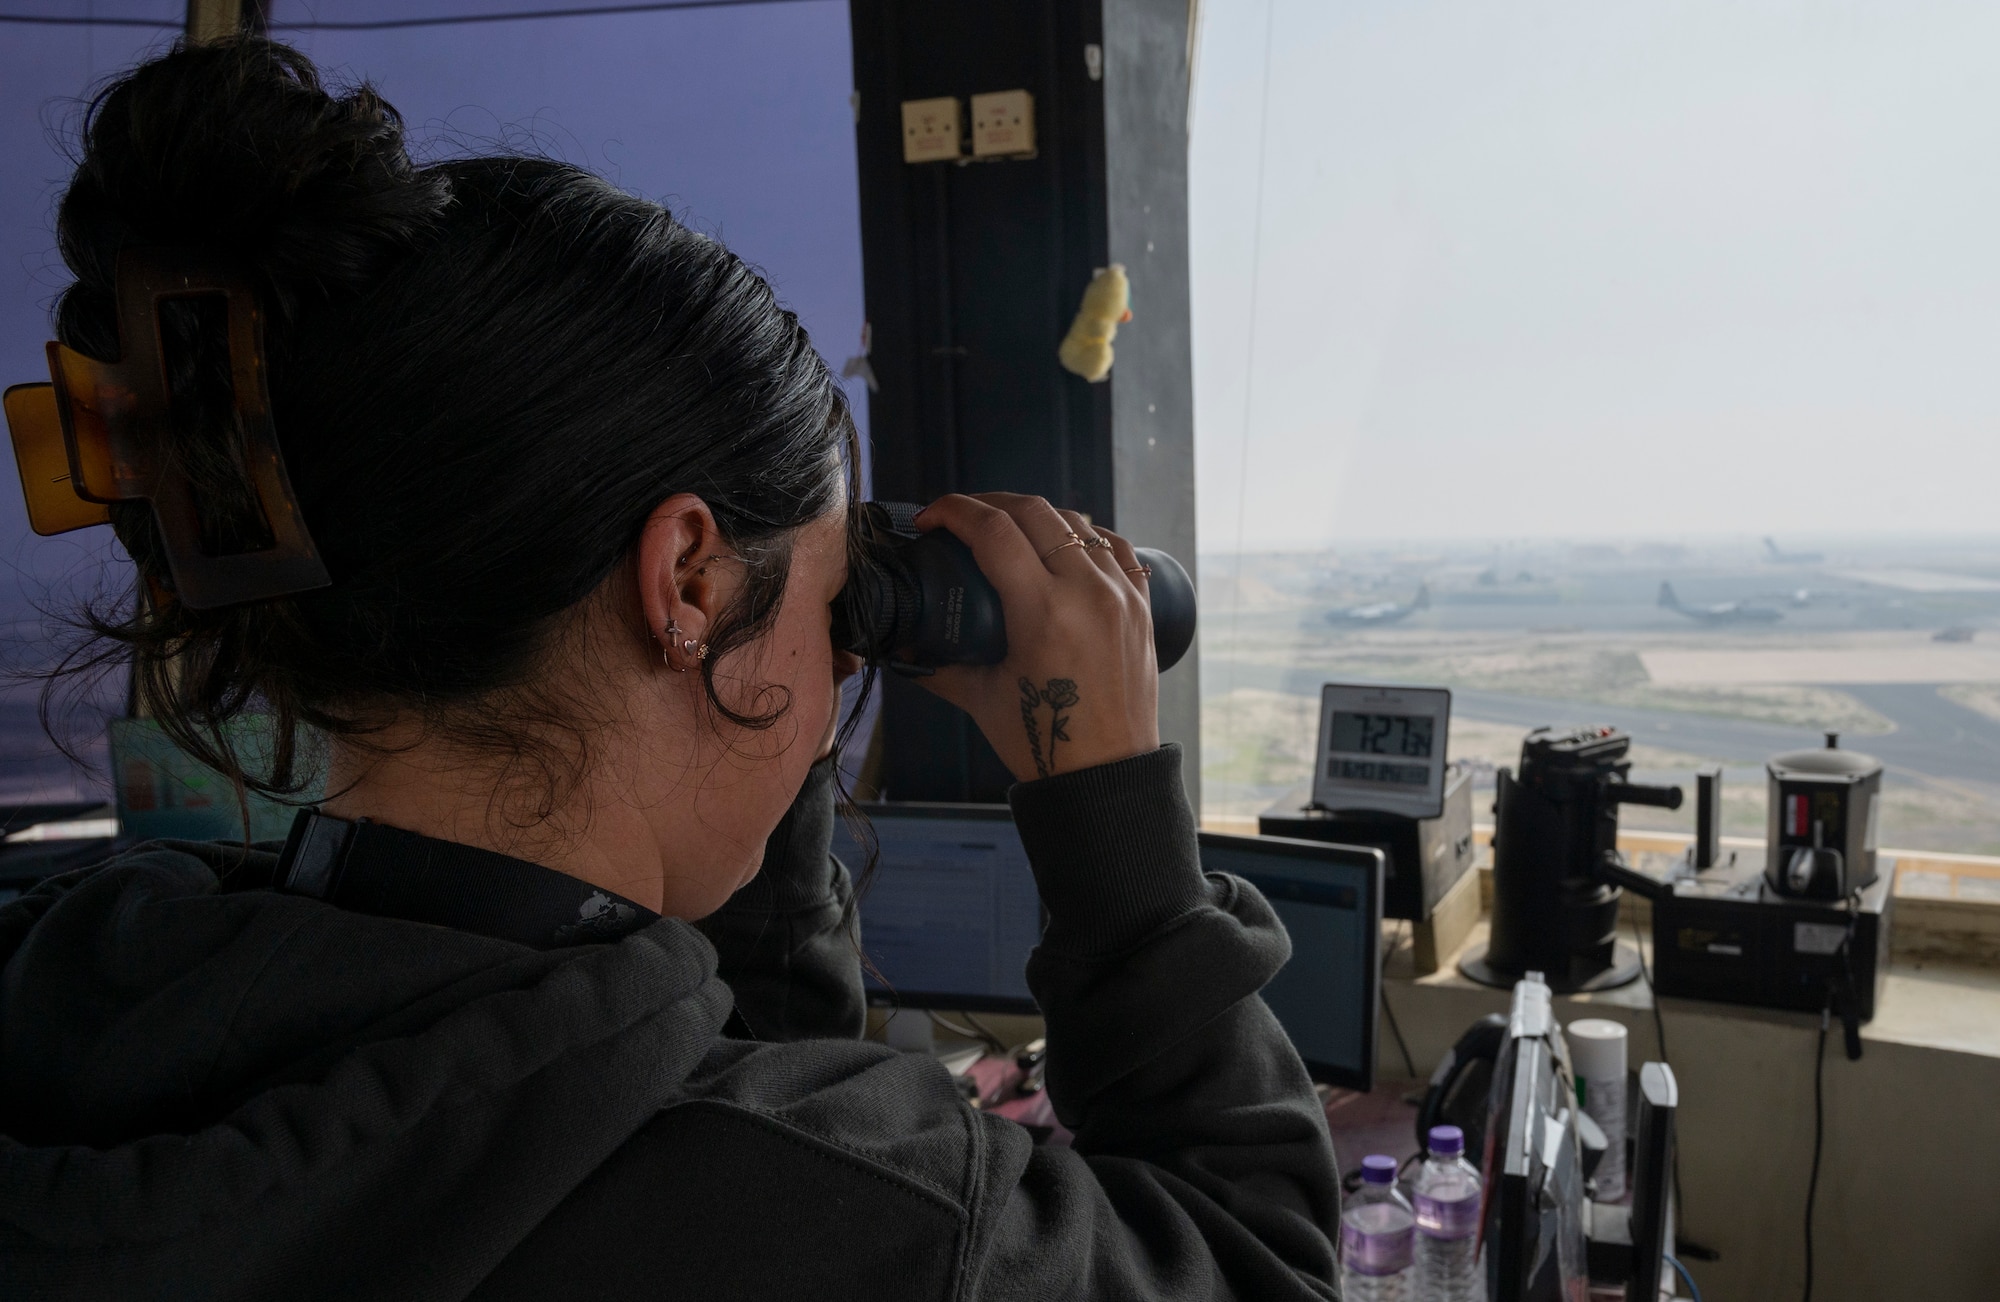 Ms. Allison Neilsen, an Air Traffic Training Manager with the 407th Expeditionary Operations Support Squadron, looks through a pair of binoculars in the Air Traffic Control Tower at Ali Al Salem Air Base, Jan. 16, 2023.